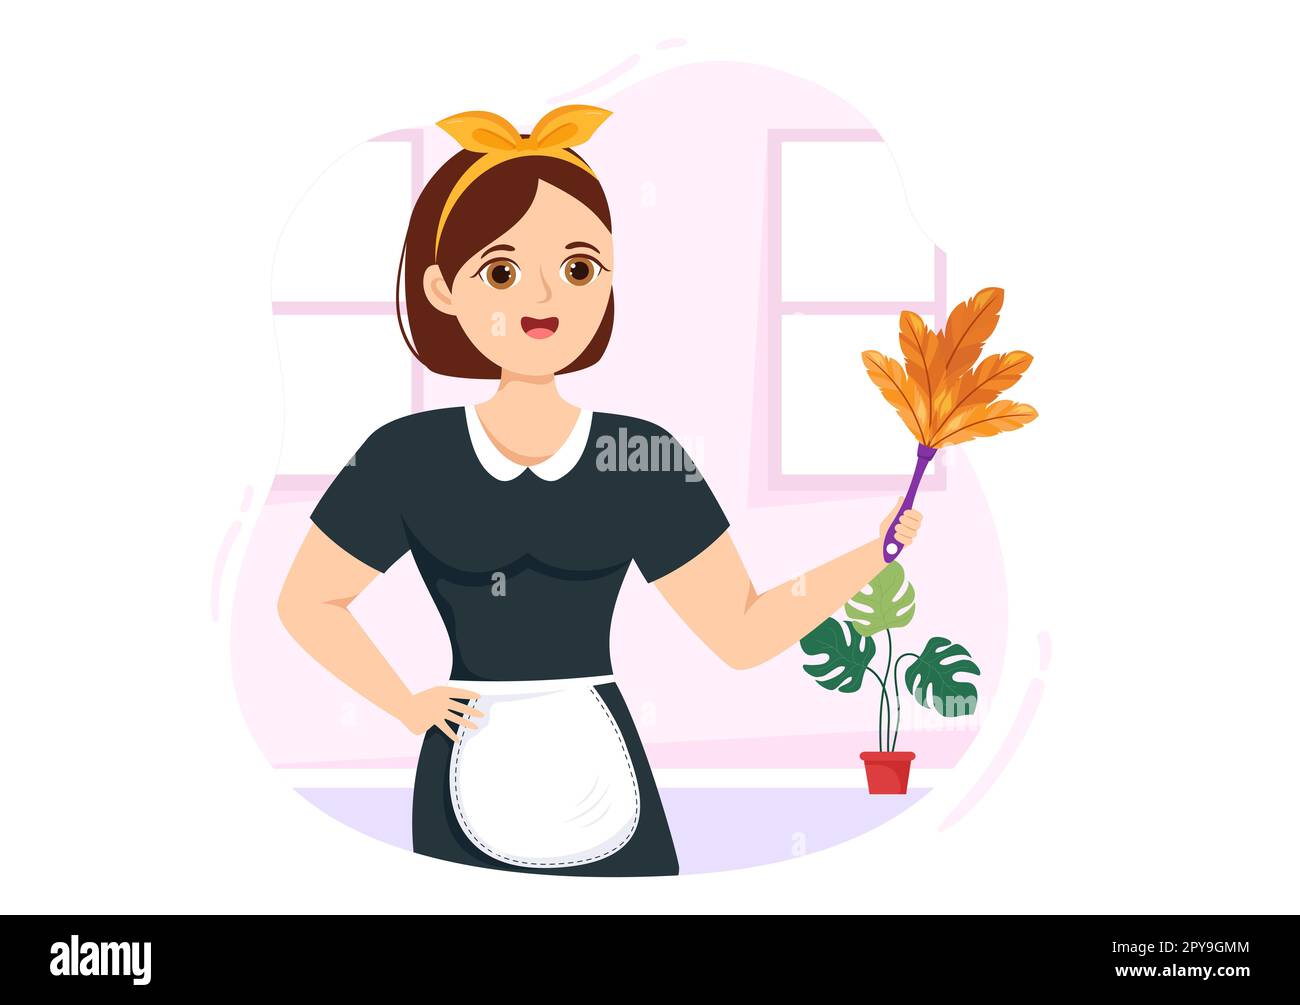 Cleaning Service Icon Set, Maid Home Office Cleaning Supplies, Professional  Housekeeping, Hotel Laundry, Chores Clipart, Dusting Disposing 